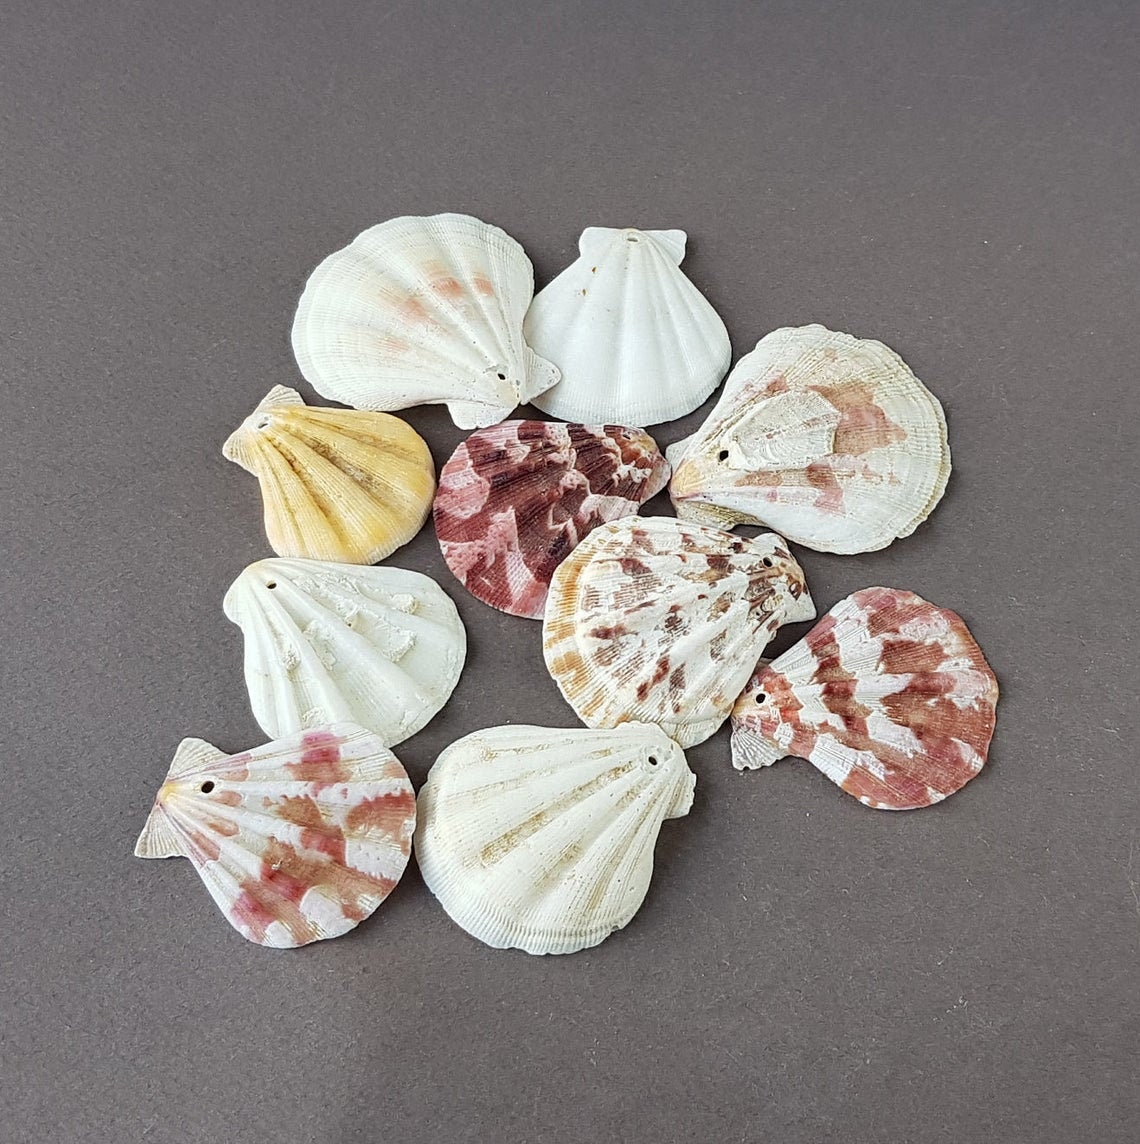 6 Pack 4-5 Inch Large Scallop Shells Sea Shells for Crafting Beach Decor